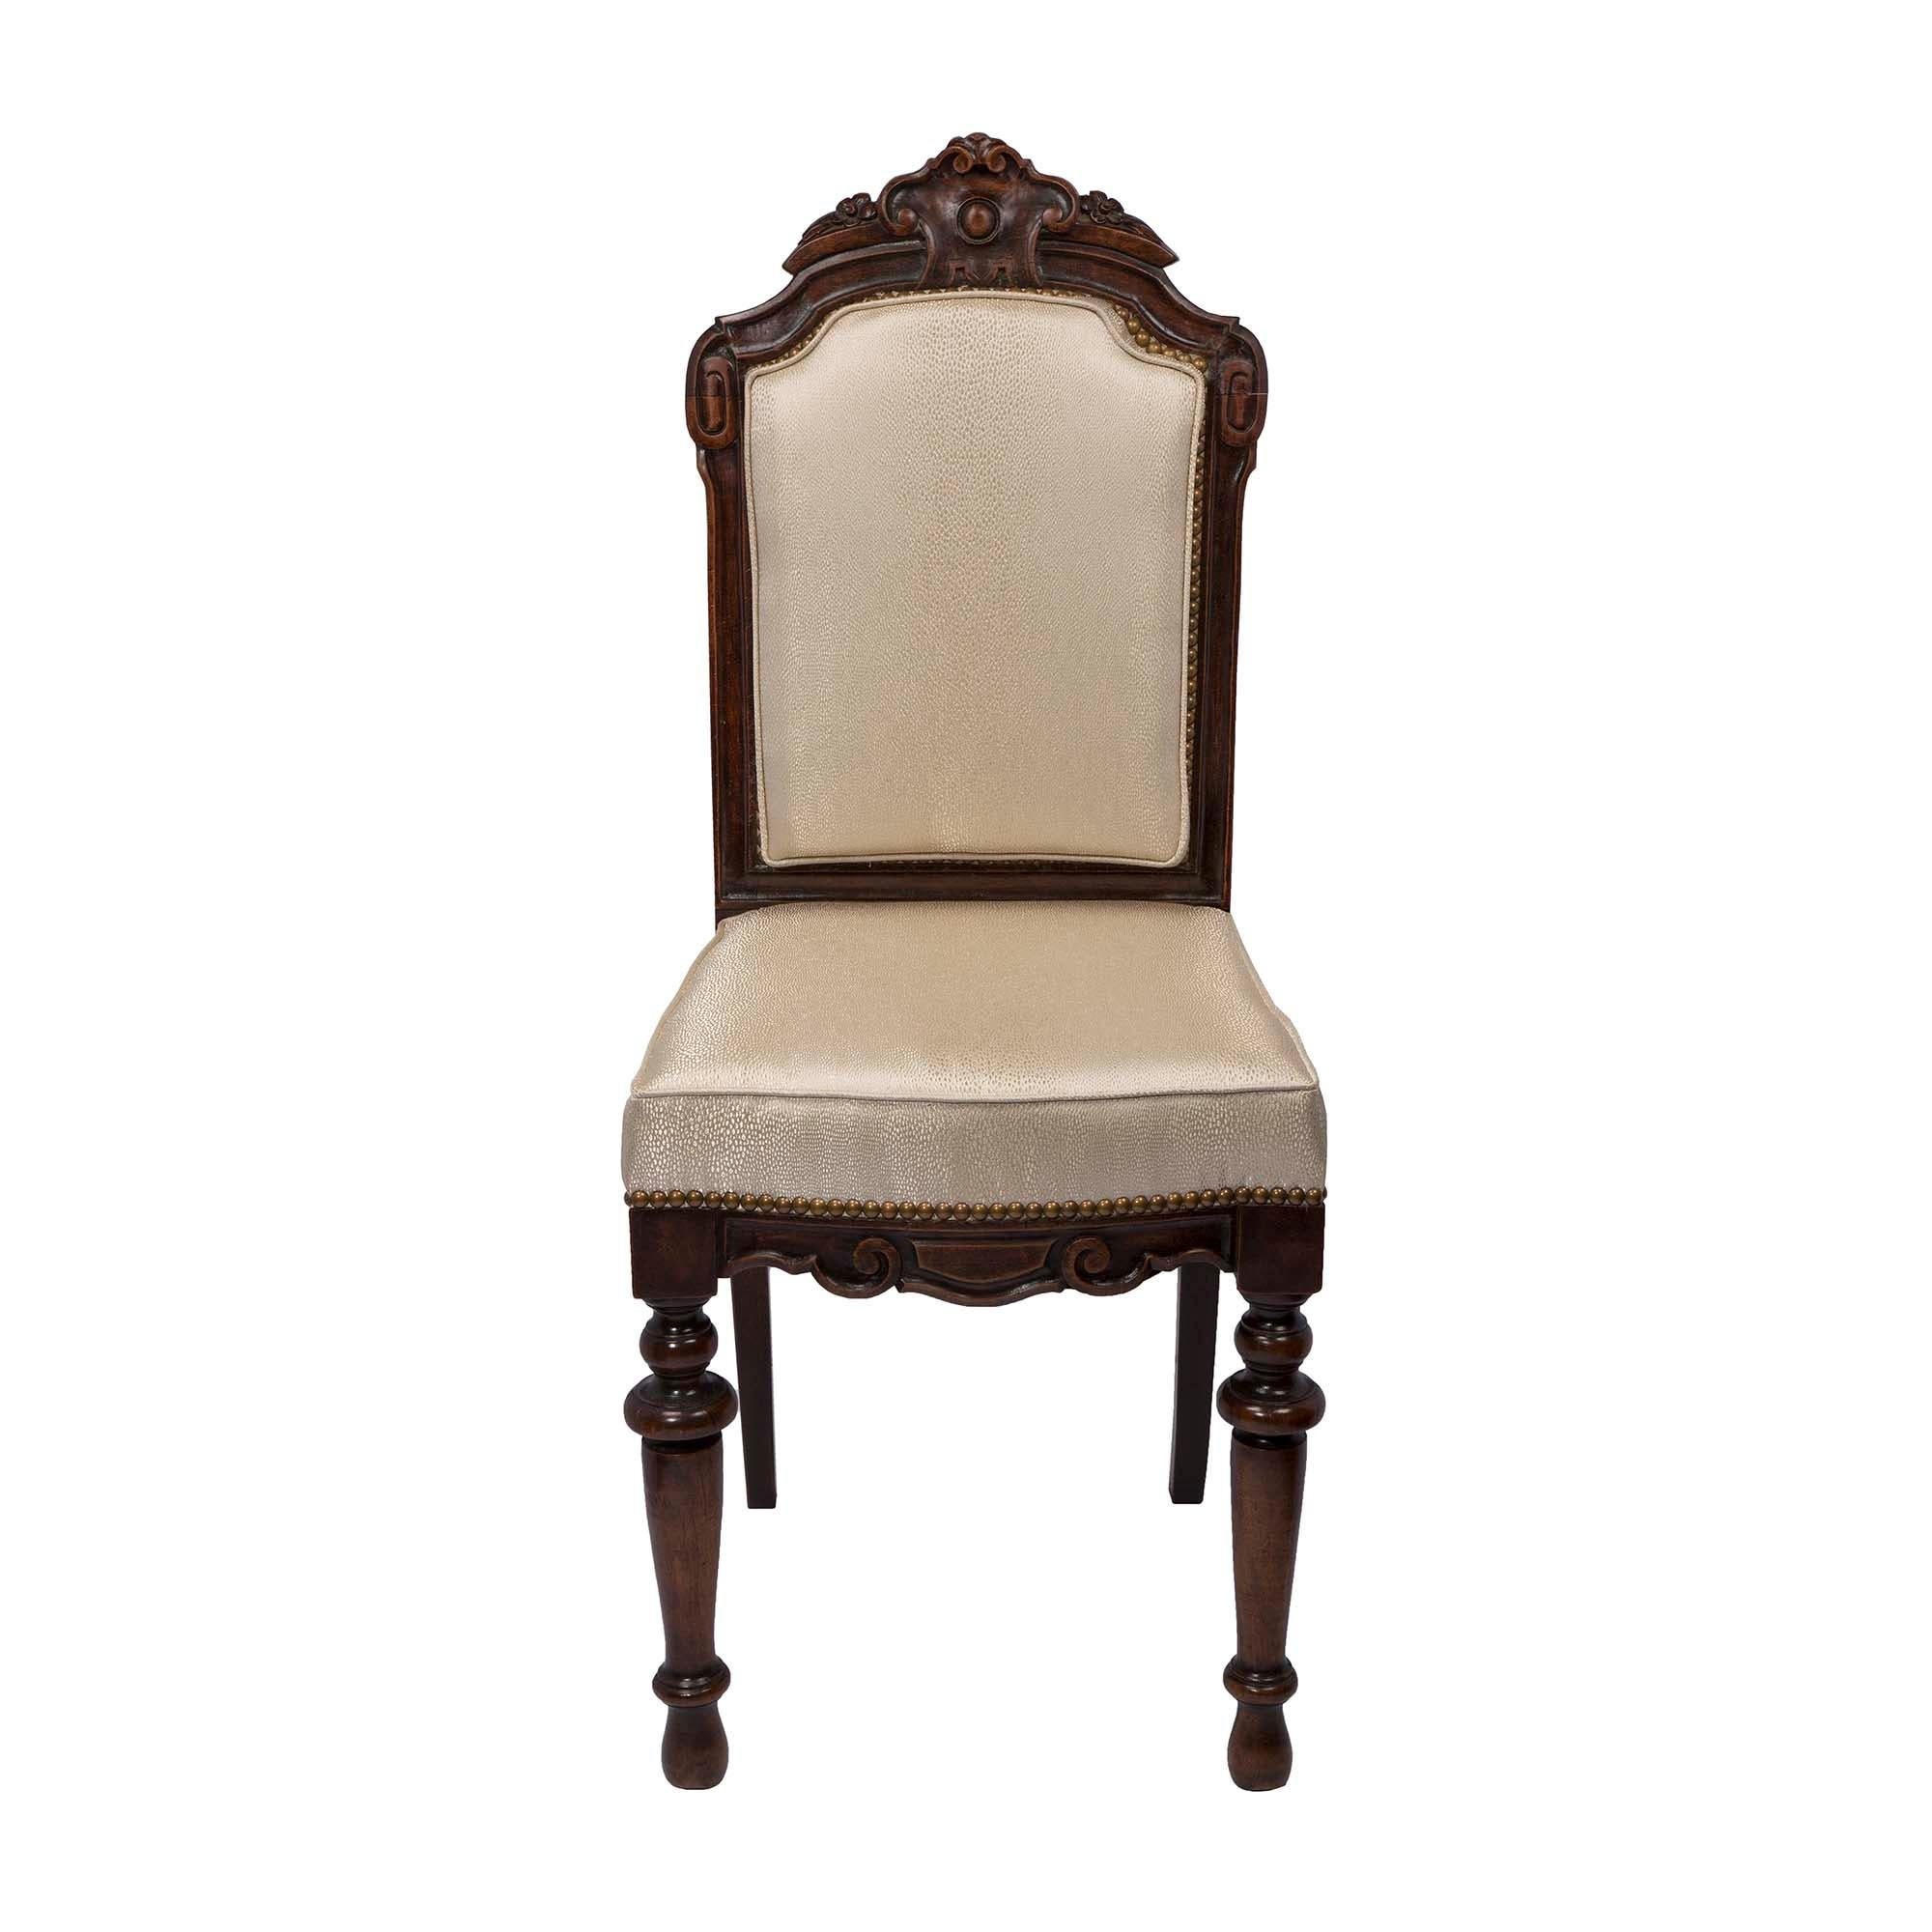 A unique and complete set of twelve French 19th century walnut dining chairs. Each chair is raised on tapered legs at the front, and straight legs in the back. The arbalest shaped frieze has wonderful scrolled carvings, at the front. A cabochon